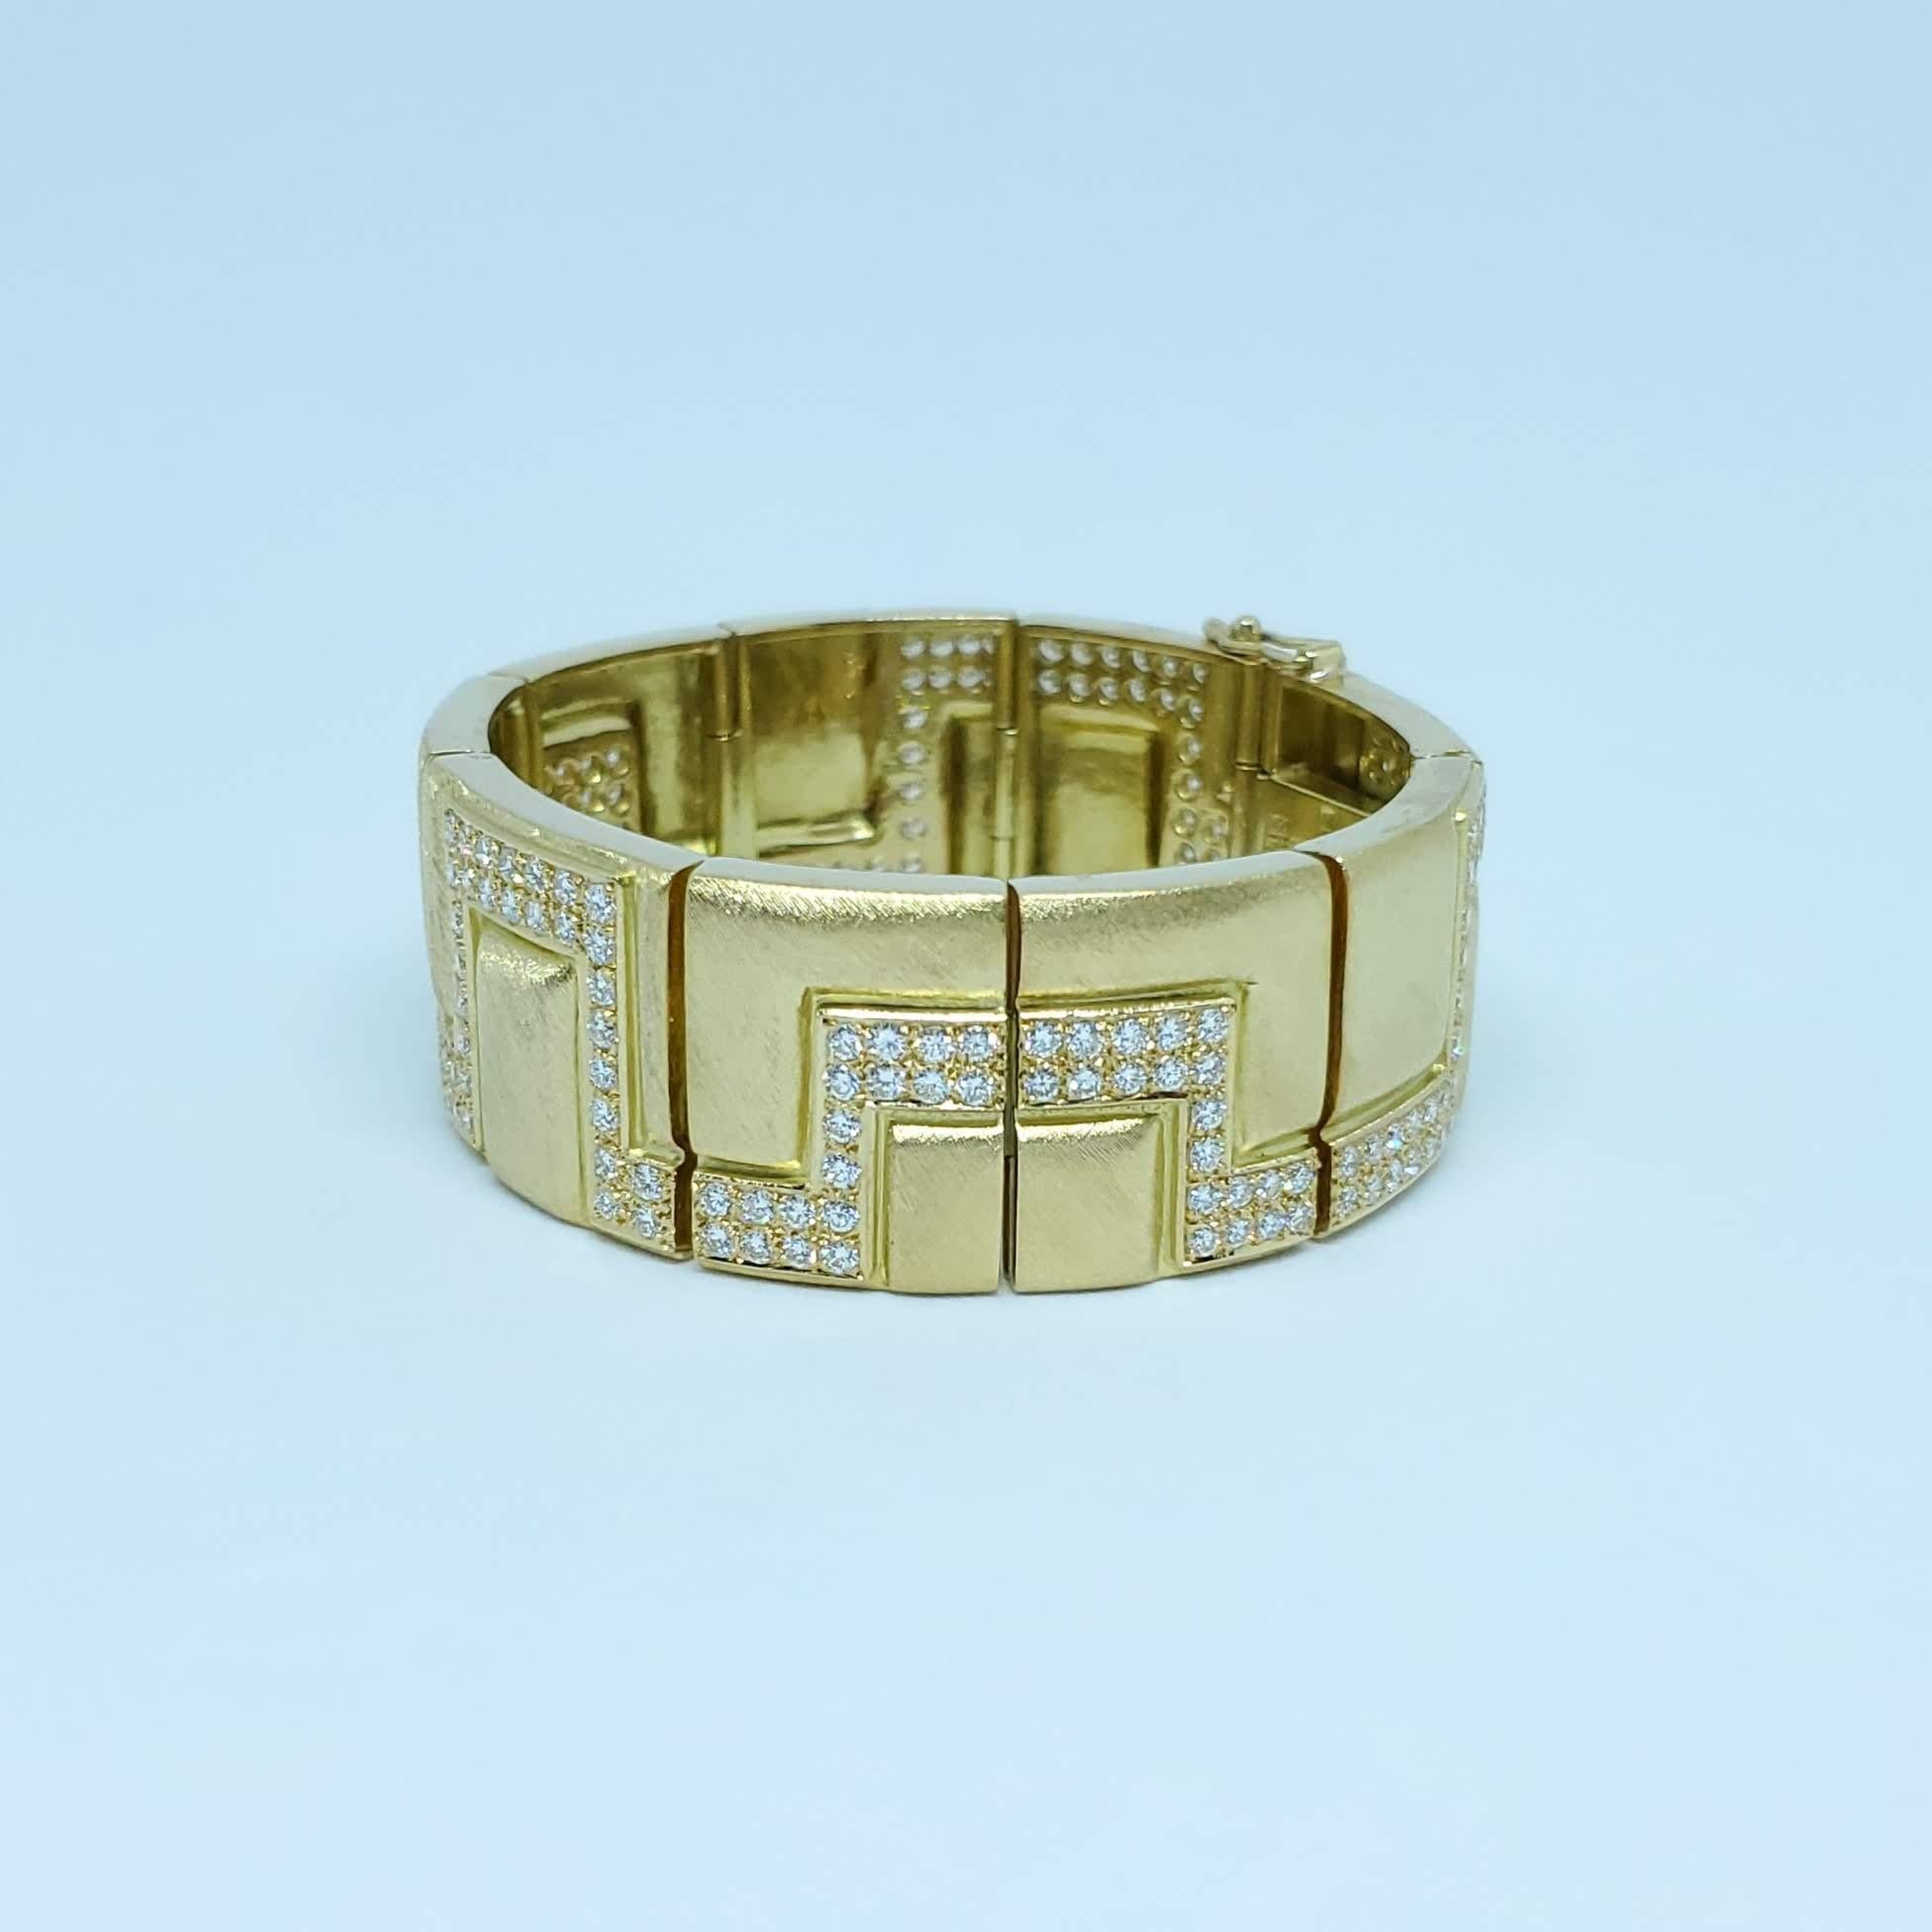 Thanks for taking a look at this exquisite Burle Marx 18 Karat Gold Diamond Bracelet. This Bruno Guidi designed piece is one of the only Diamond Bracelets Burle Marx ever made. We acquired it from the daughter of the original purchaser, who